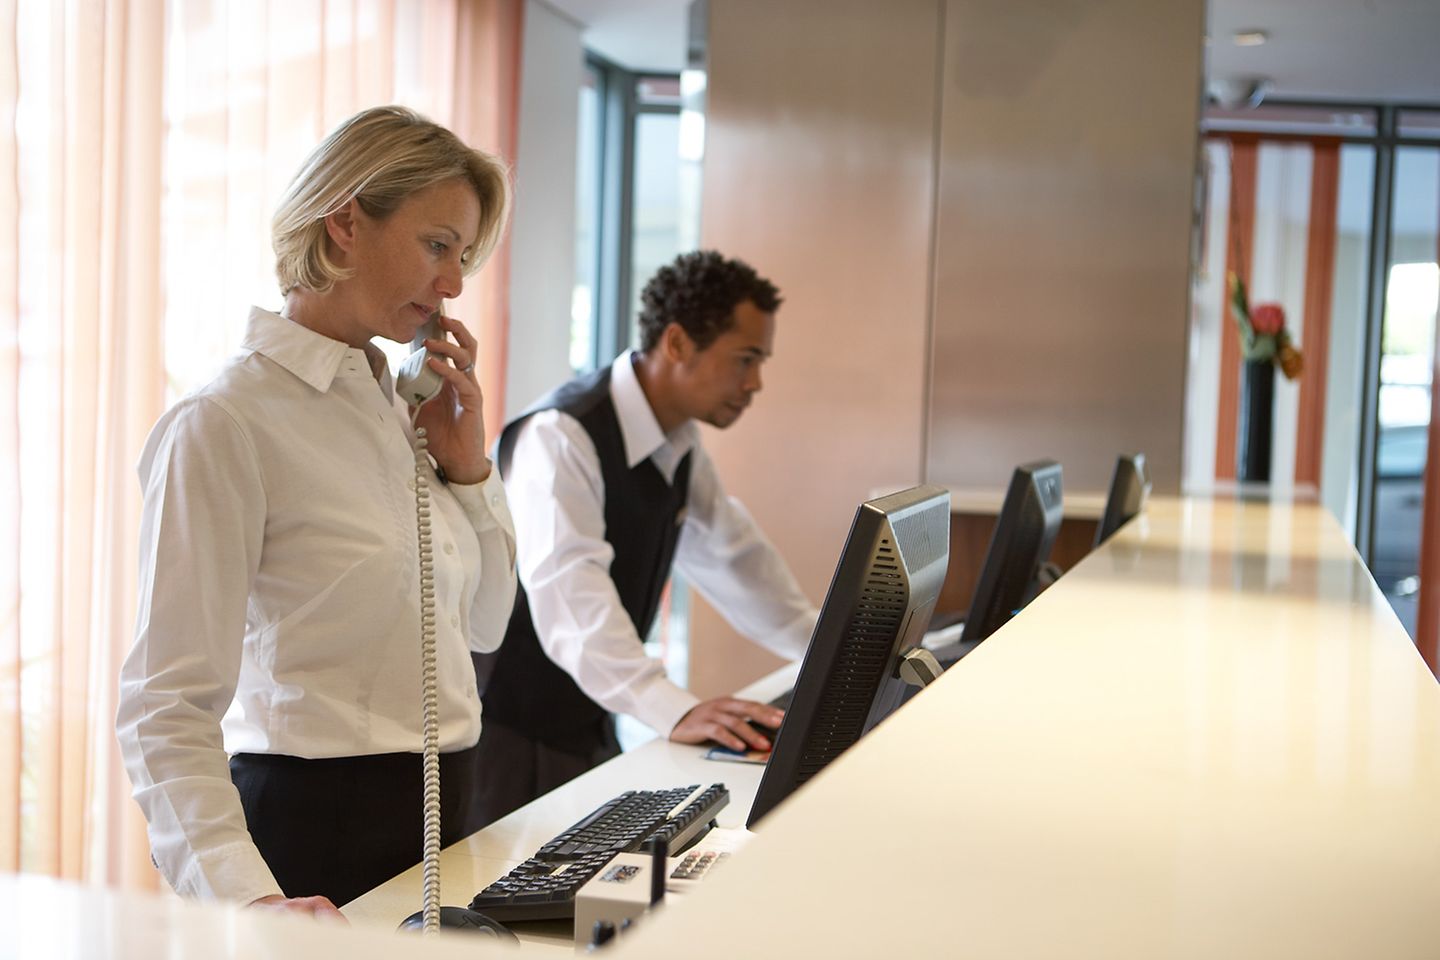 Receptionist stands behind the hotel reception desk on the phone, her colleague checks the data on the computer